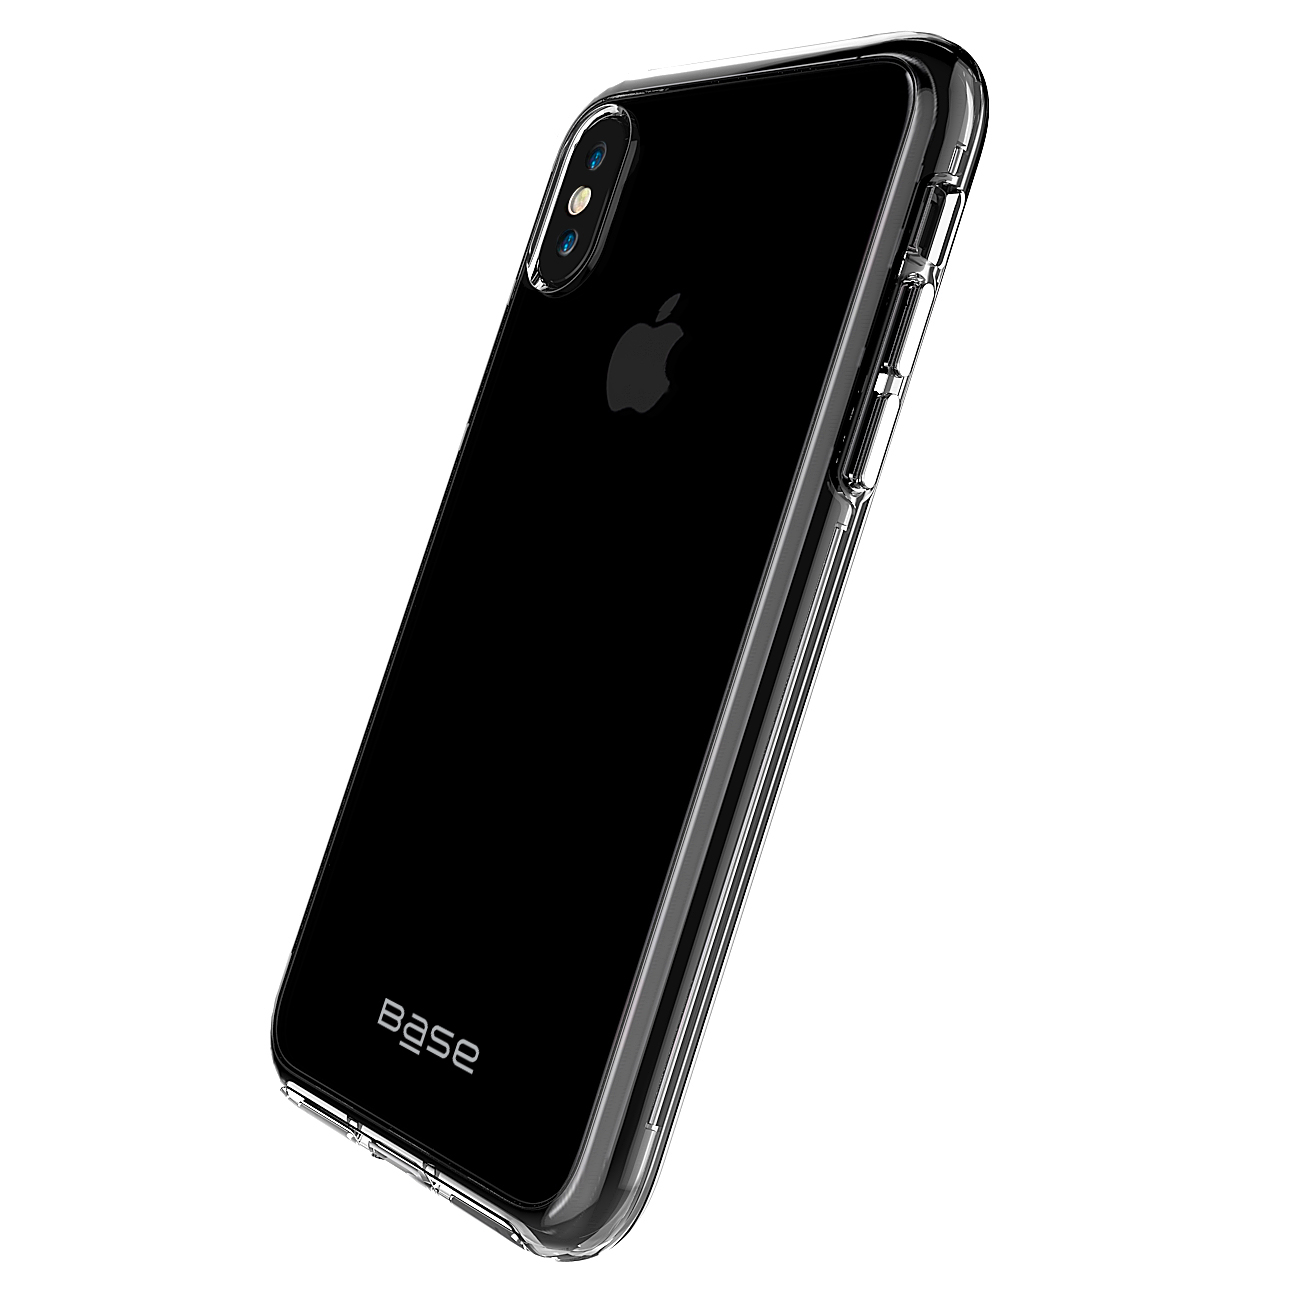 Base Crystal Shield - Reinforced Bumper Protective Case for iPhone X - Clear